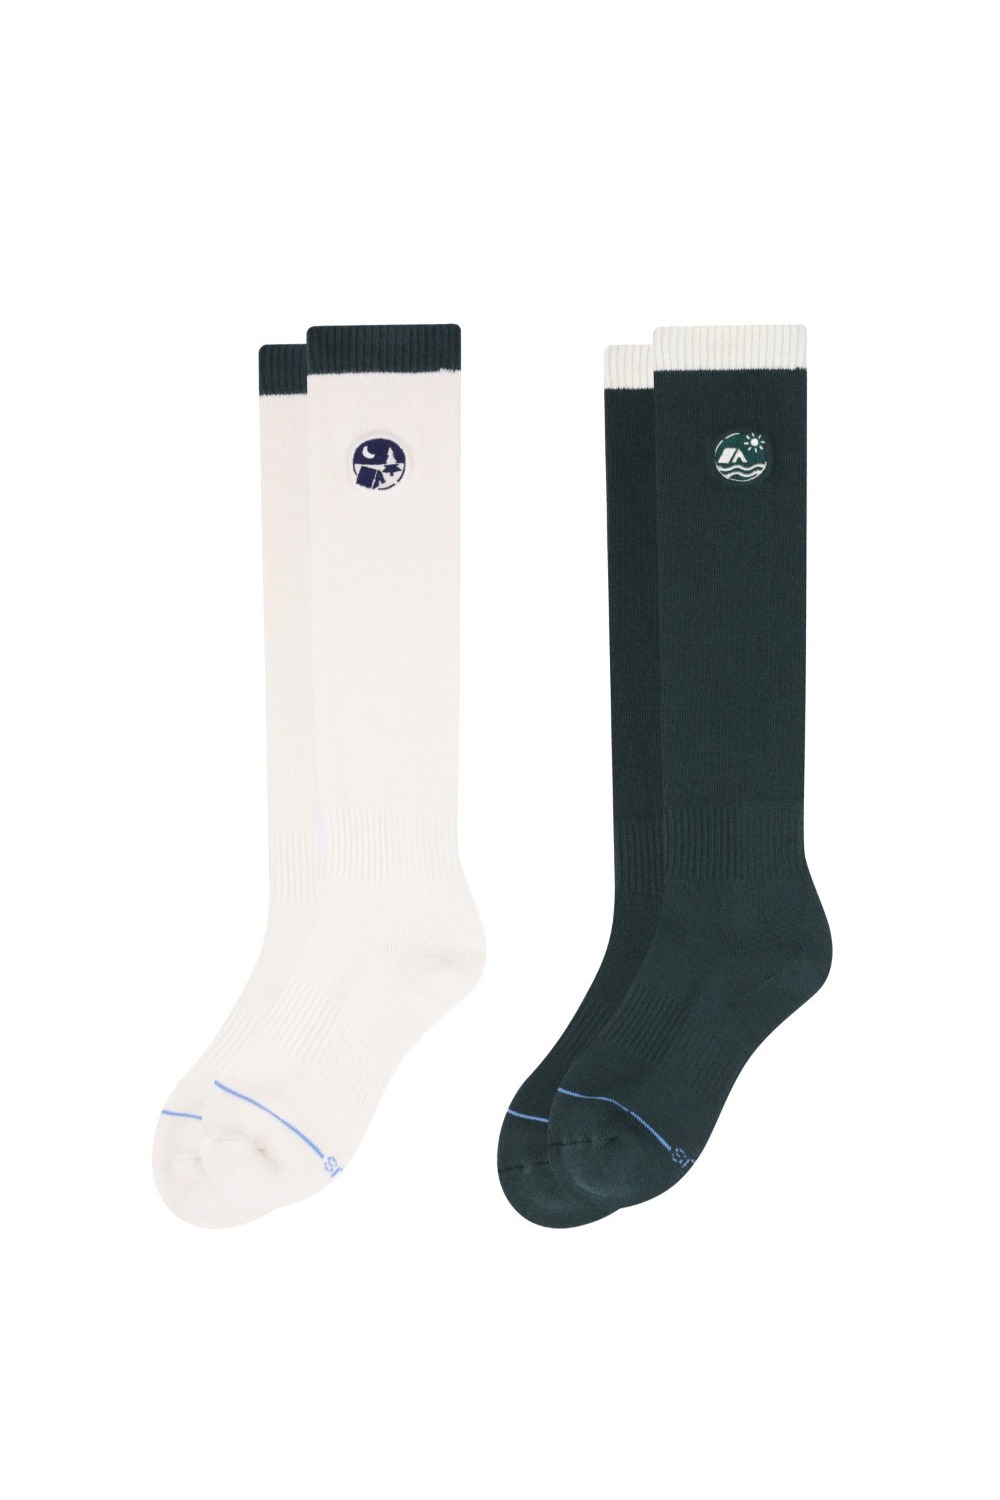 CAMPING ALL DAY CUSION KNEE SOCKS 2PK (IVORY/D.GREEN) RICHEZ